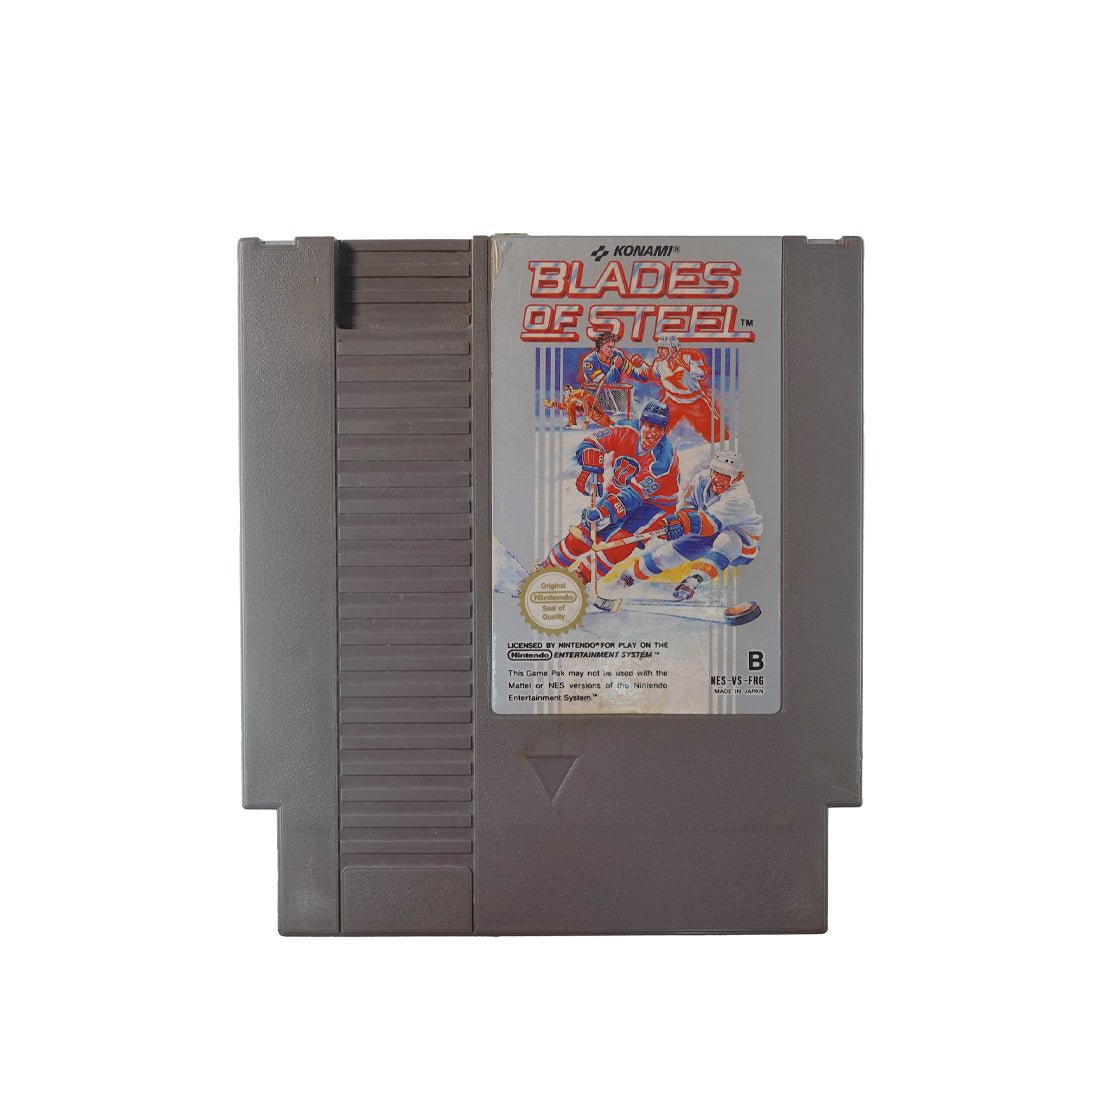 (Pre-Owned) Blades of Steel - Nintendo Entertainment System - ريترو - Store 974 | ستور ٩٧٤